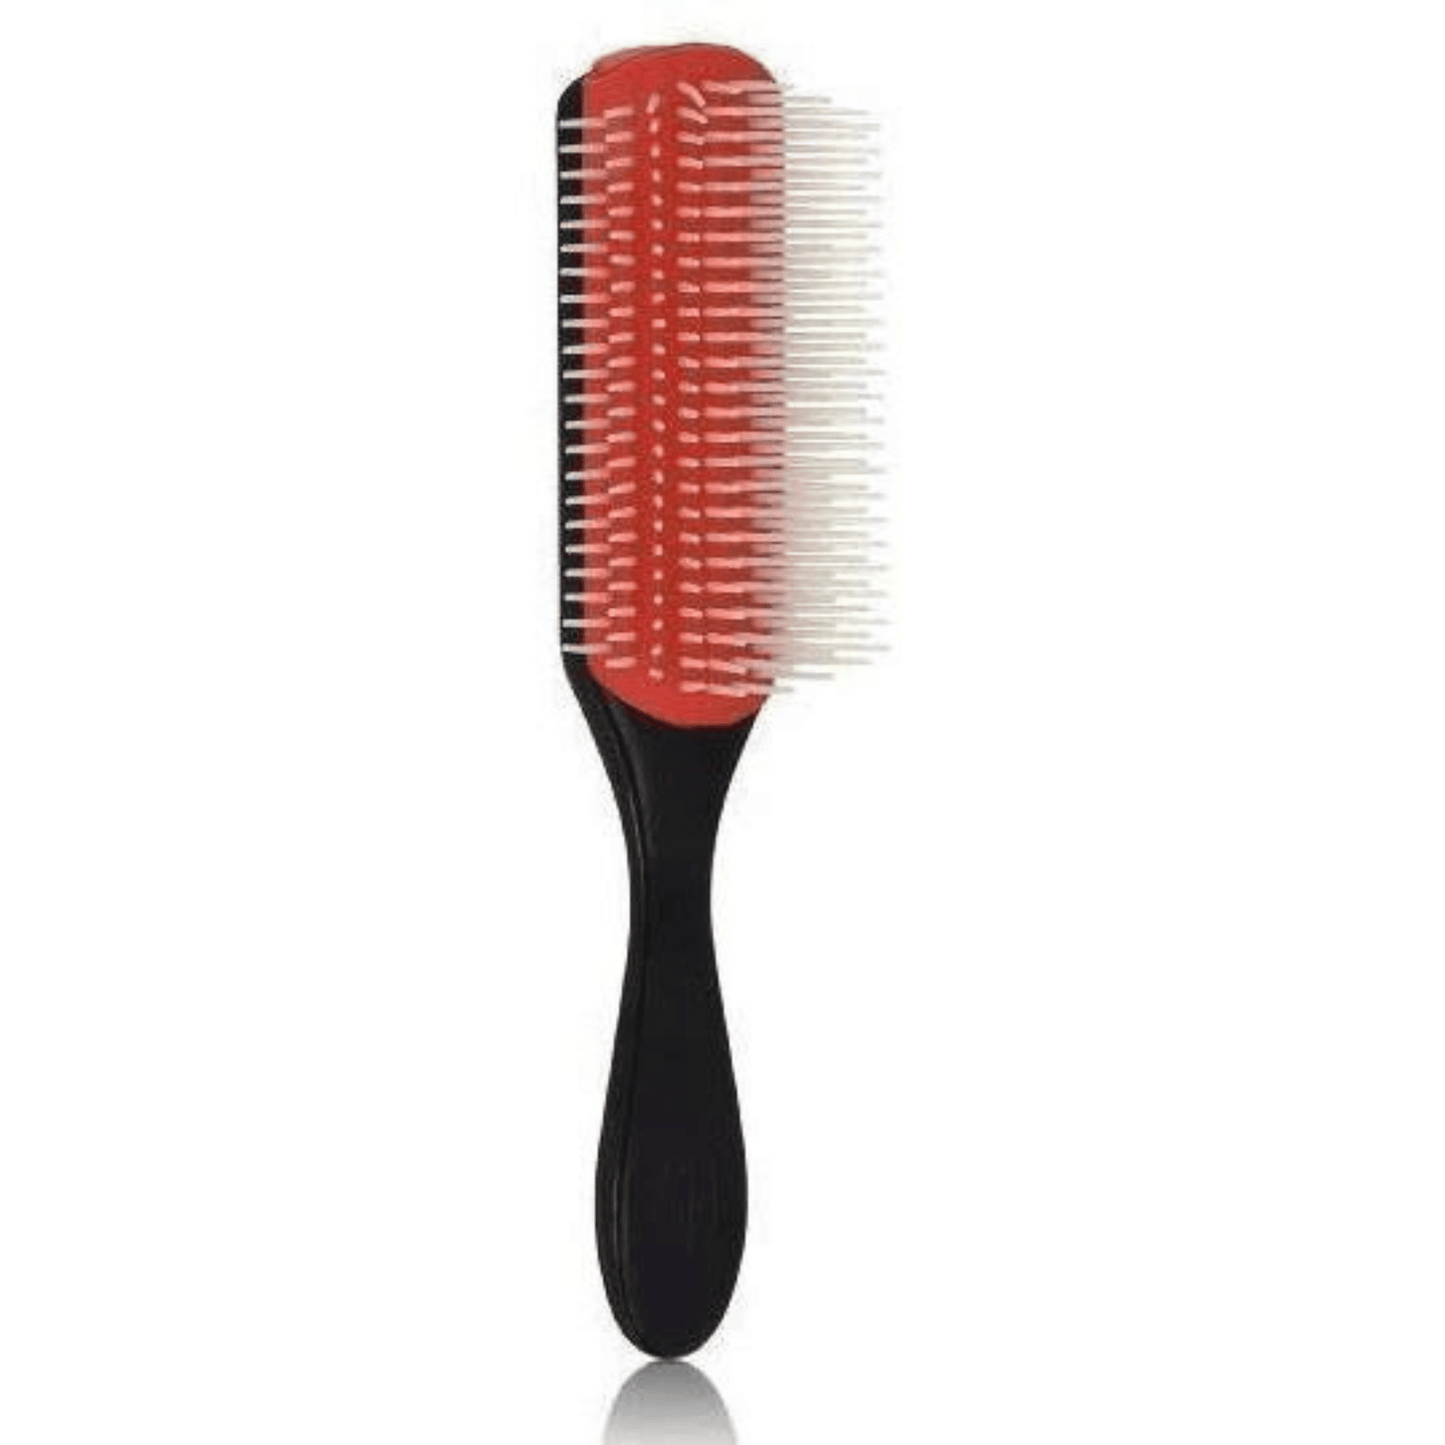 Primary Image of Classic Nine Row Styling Hair Brush